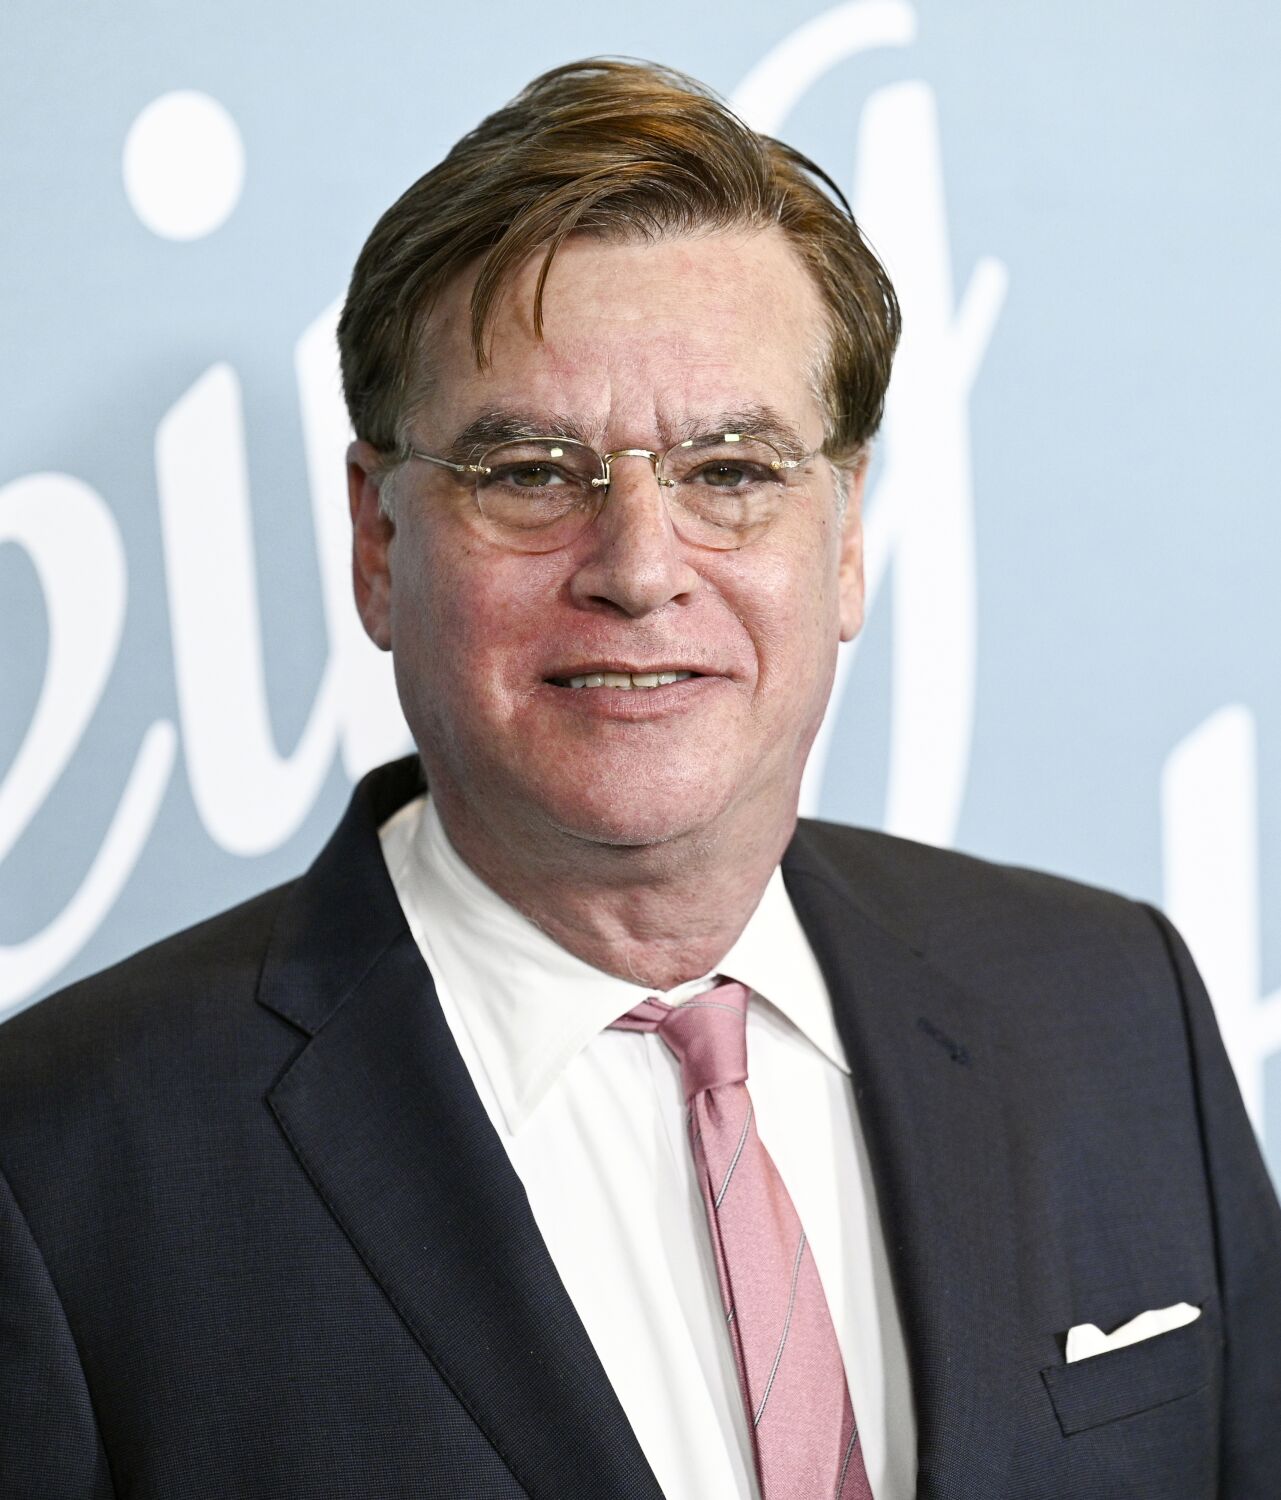 Aaron Sorkin had a stroke but kept it private for months: 'It was a loud wake-up call'